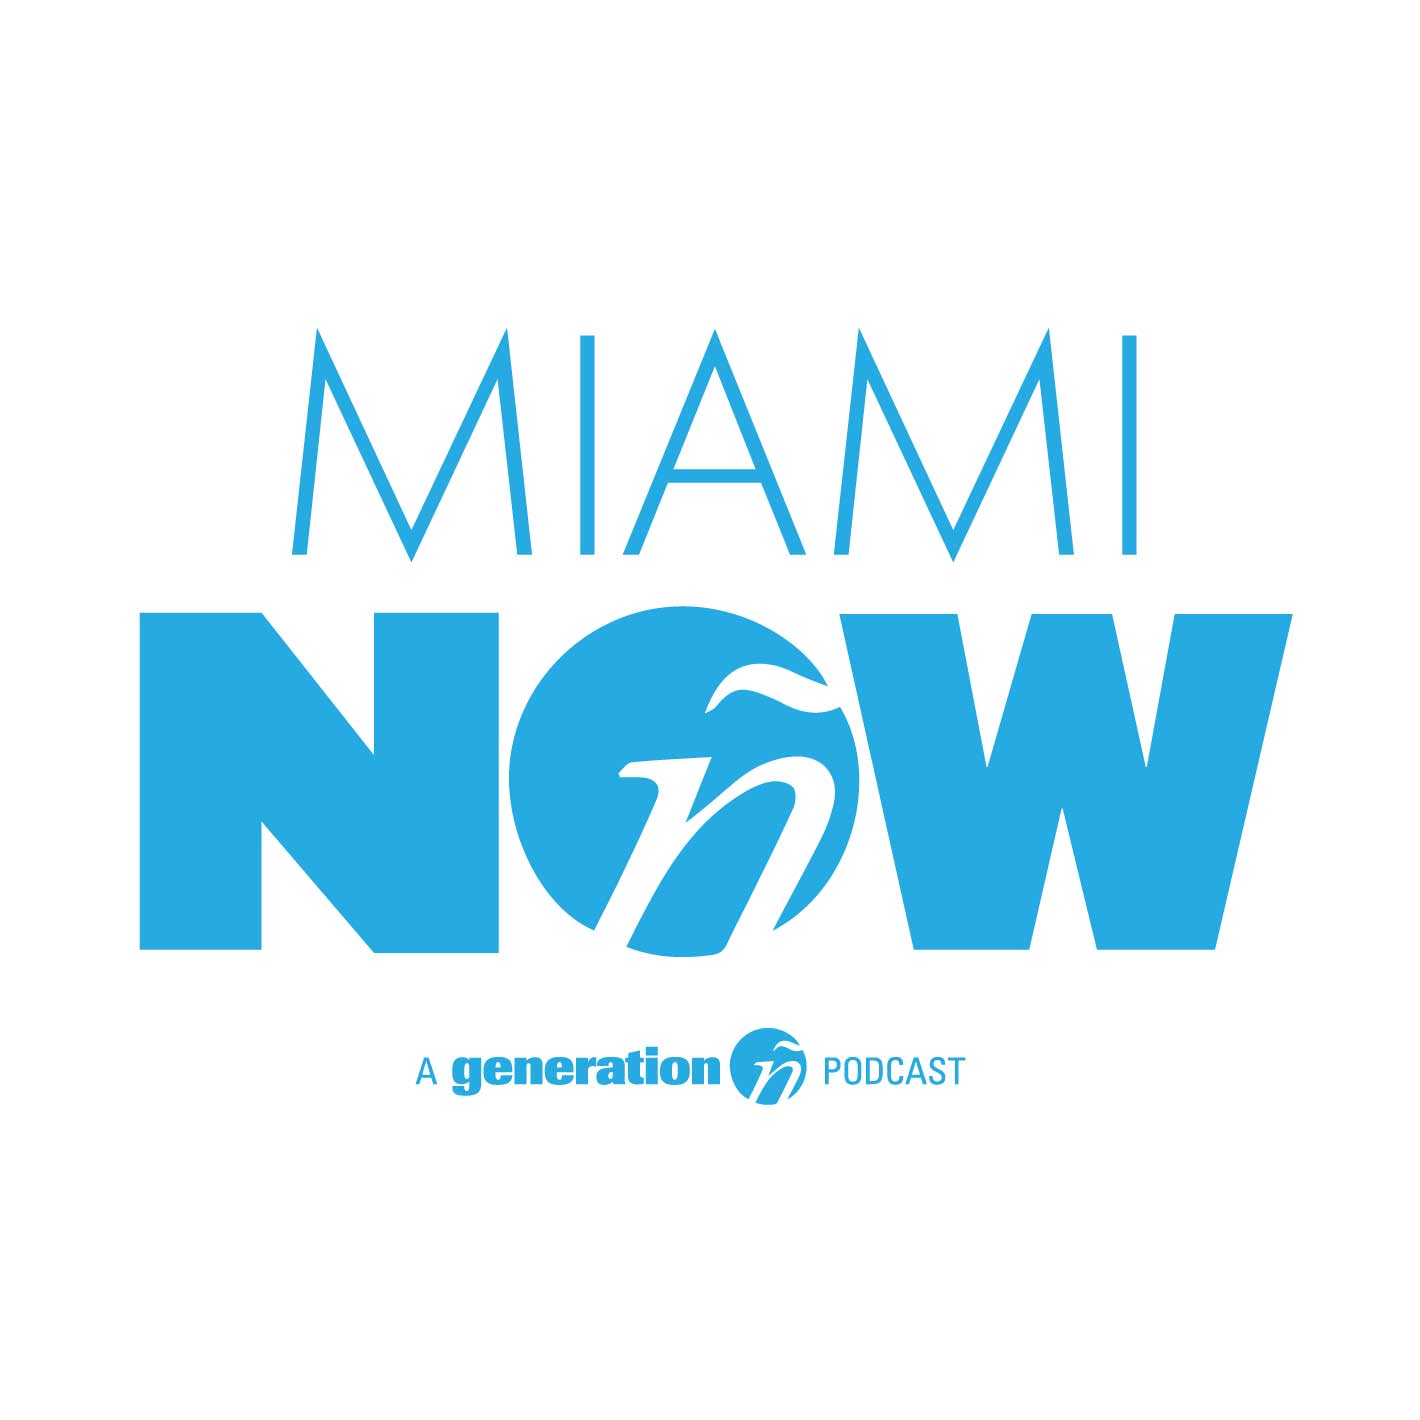 Check out Miami Now, generation ñ’s new podcast